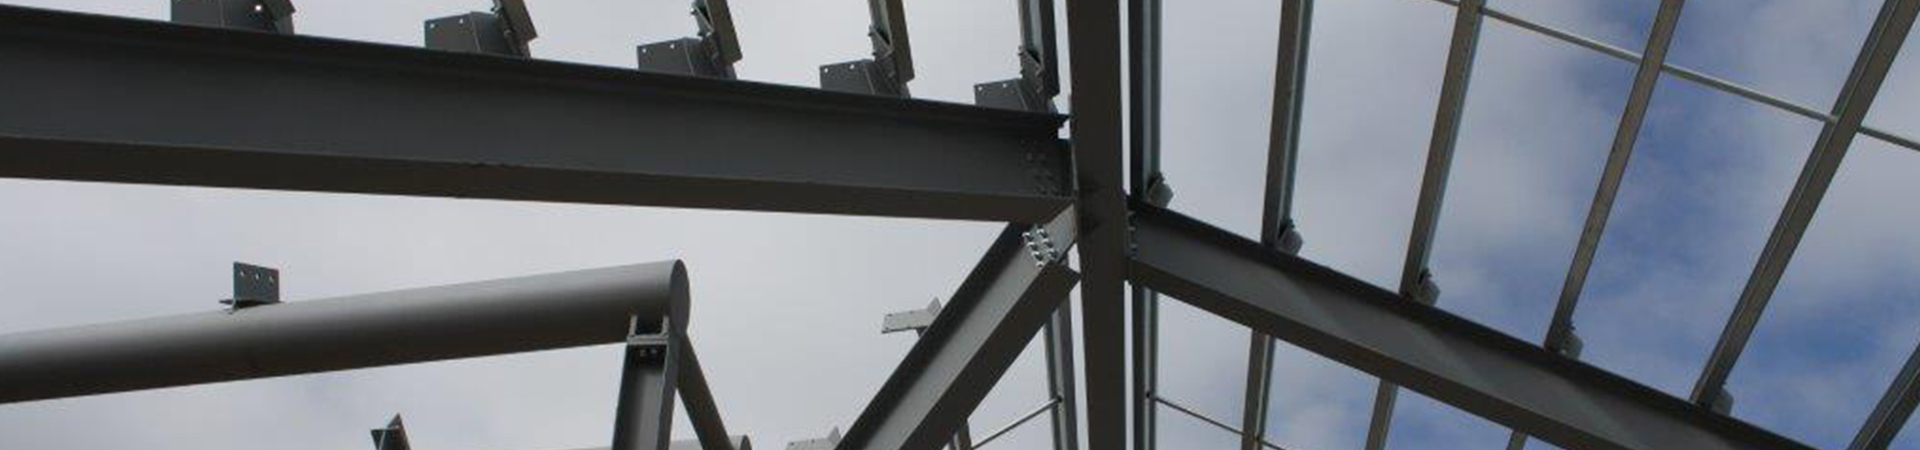 Constructional Steelwork by BCSA RQSC contractor